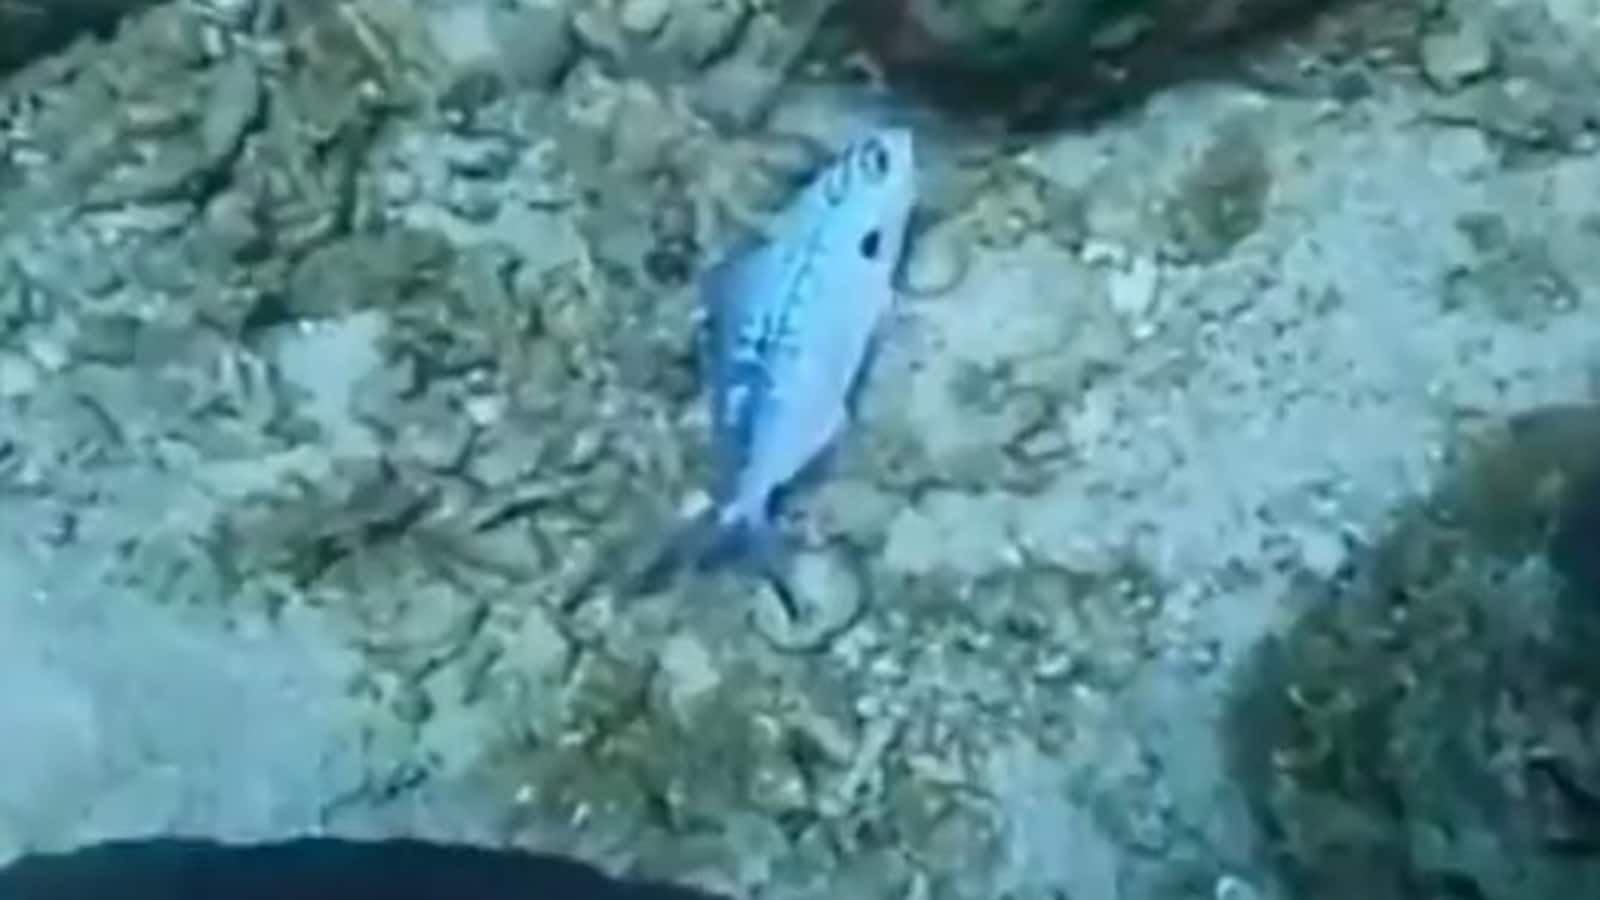 Video shows fish trapped in a plastic bag in ocean. Watch how